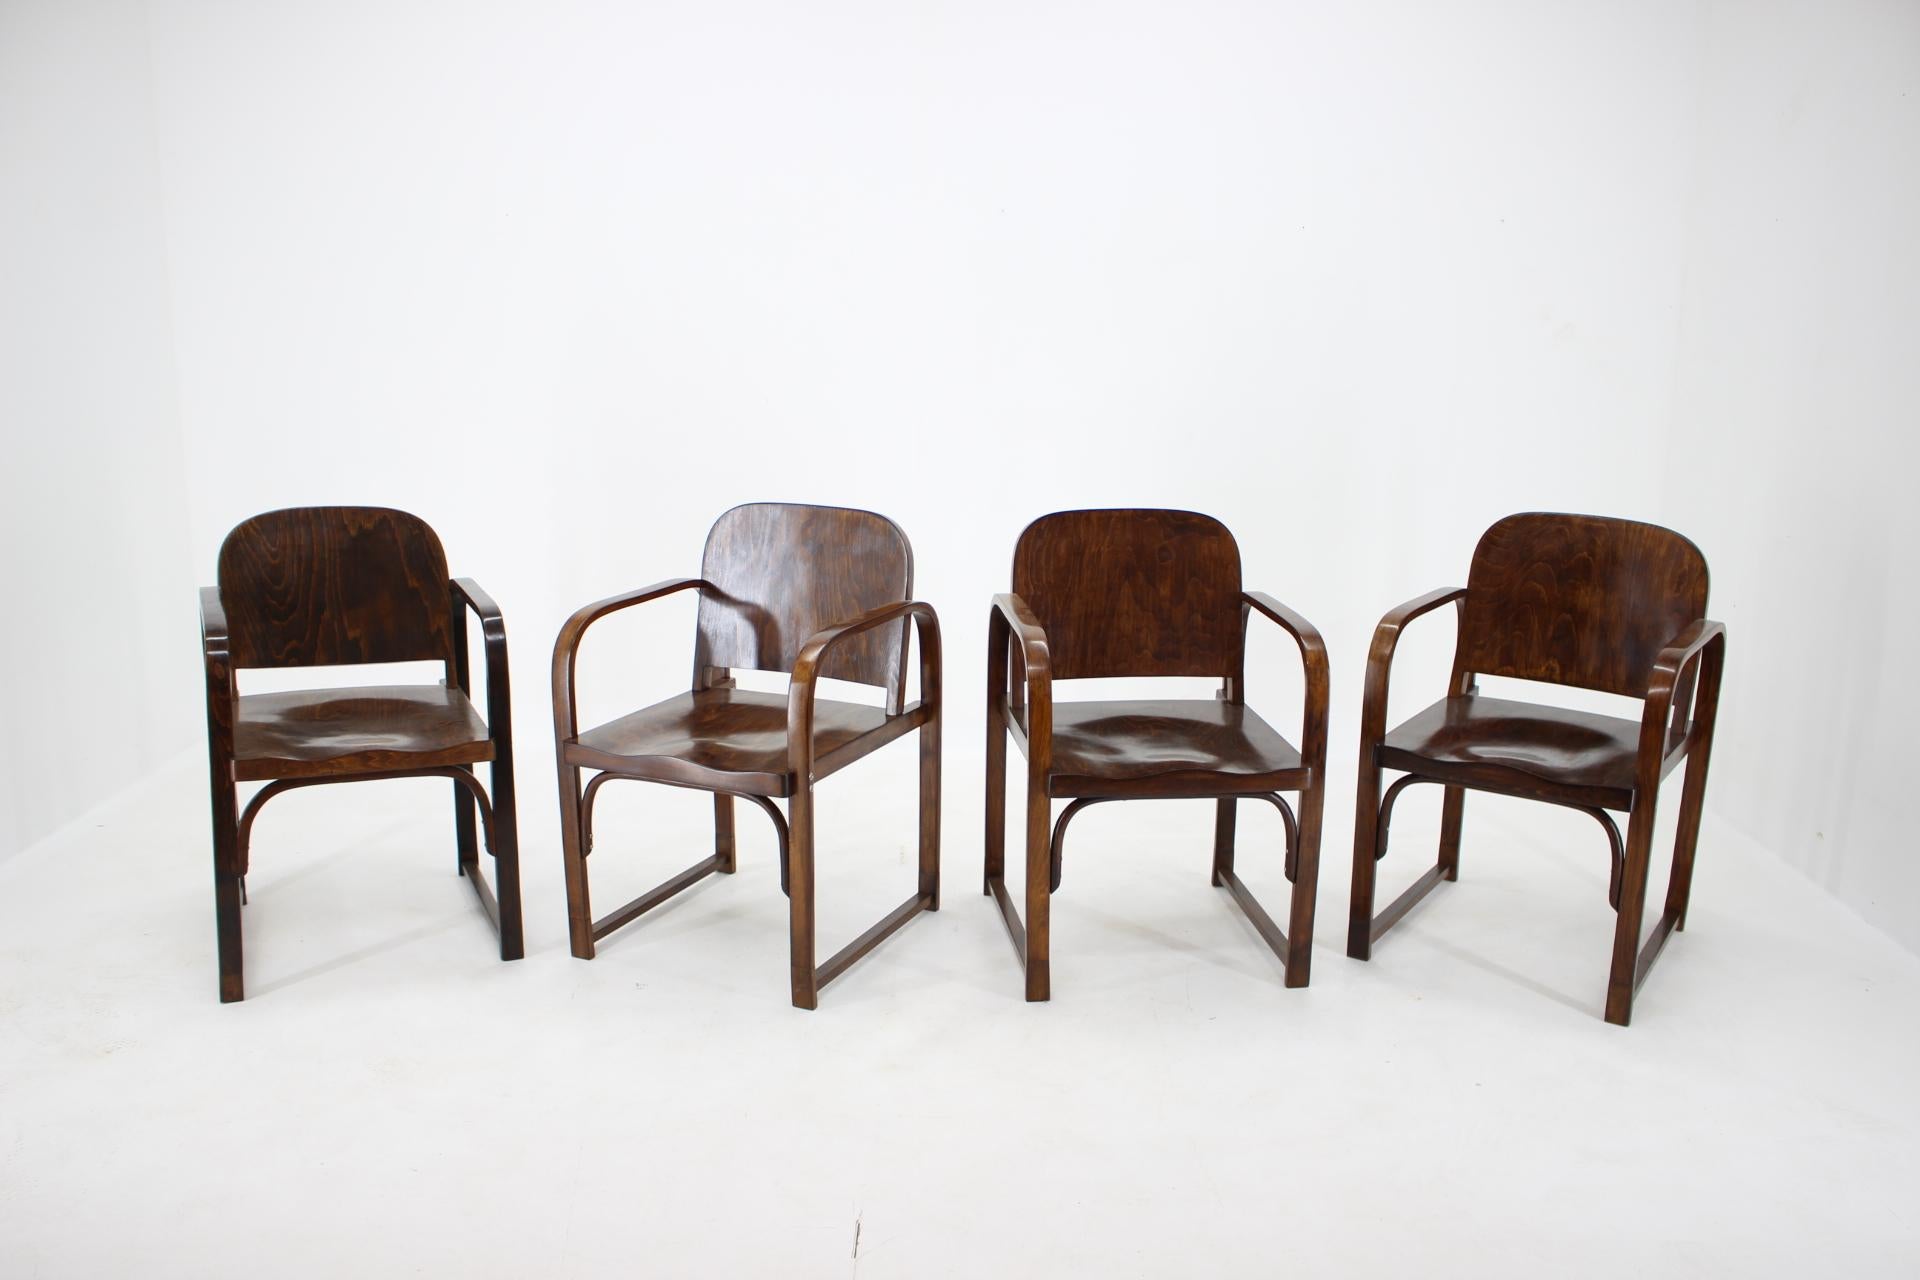 - Up to 4 pieces available 
- Finished with shellac
- The ends of the legs (circa 10cm) were replaced for new ones because they were damaged however the chairs are sturdy and stable 
- Labeled by producer
- Hight of seat 46 cm.